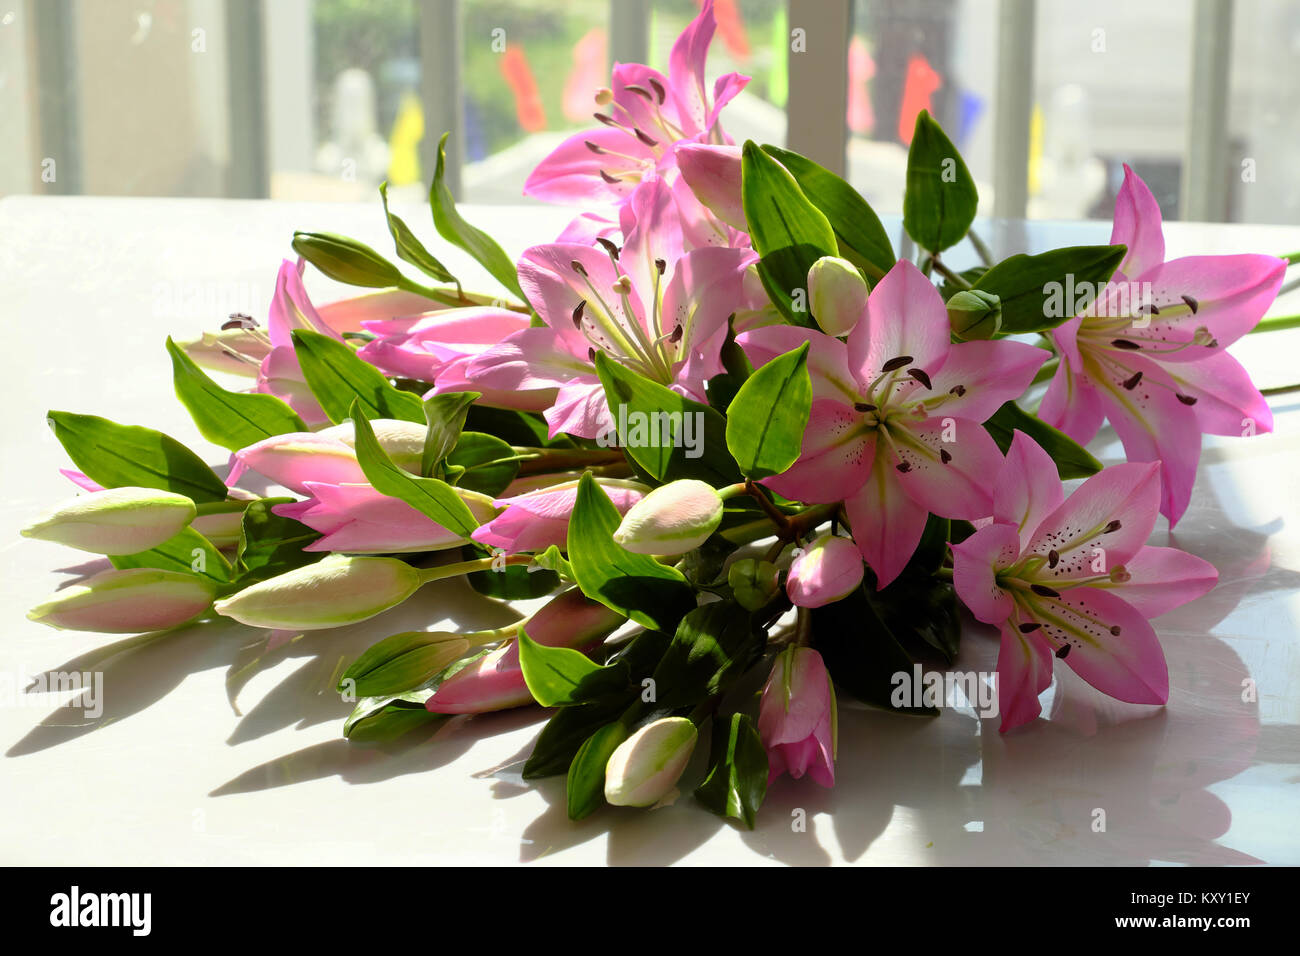 Beautiful Artificial Flower From Clay Art Bunch Of Purple Lily Stock Photo Alamy